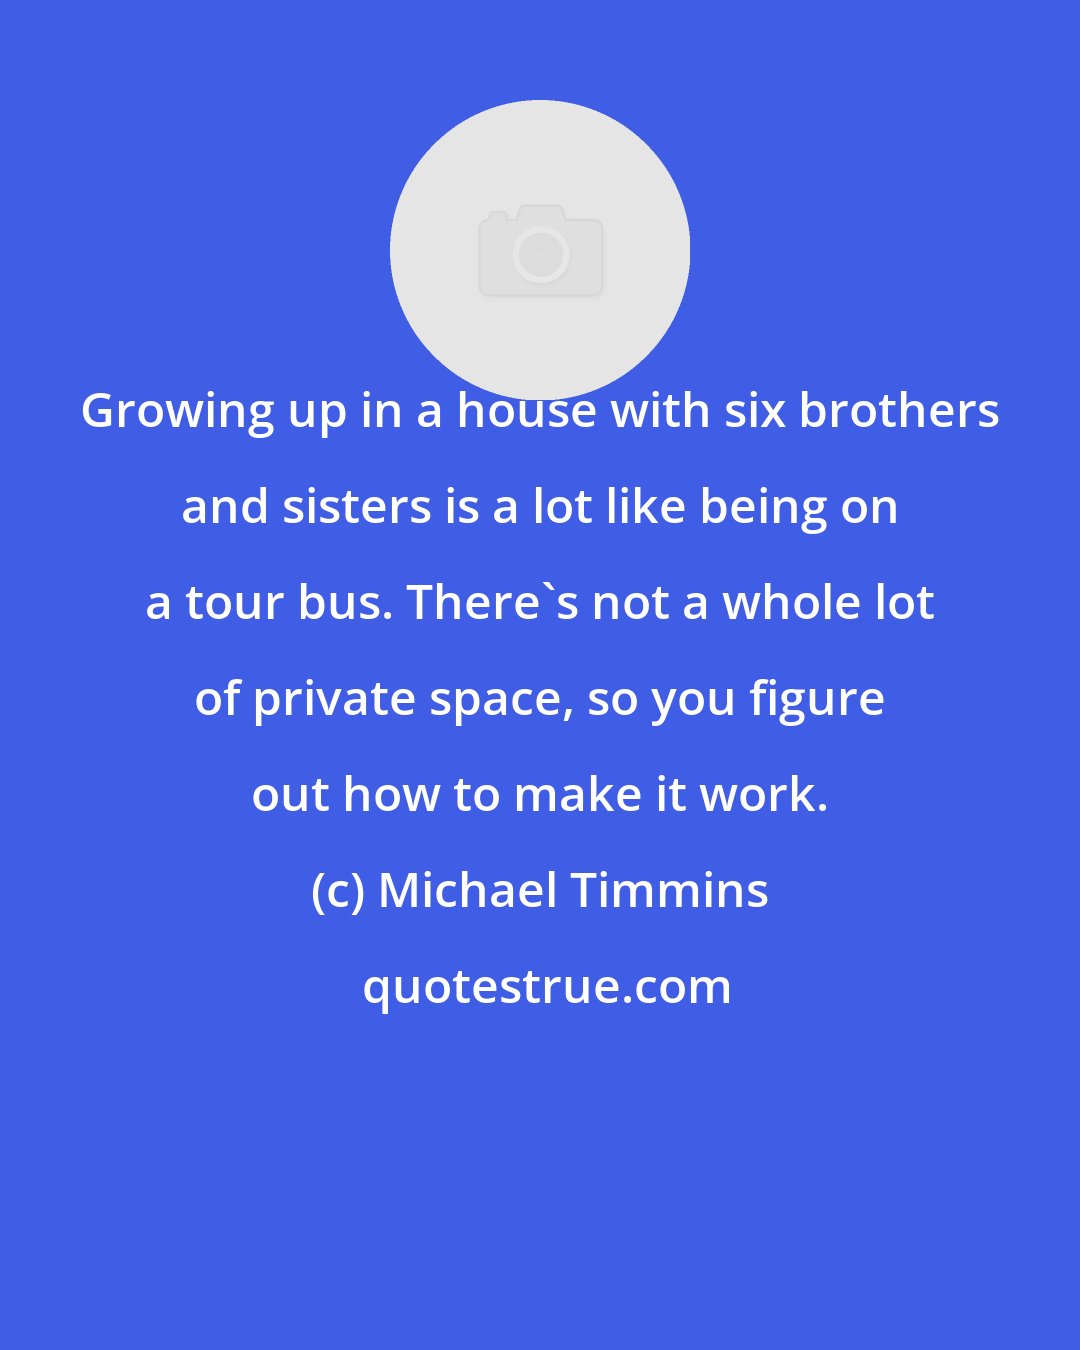 Michael Timmins: Growing up in a house with six brothers and sisters is a lot like being on a tour bus. There's not a whole lot of private space, so you figure out how to make it work.